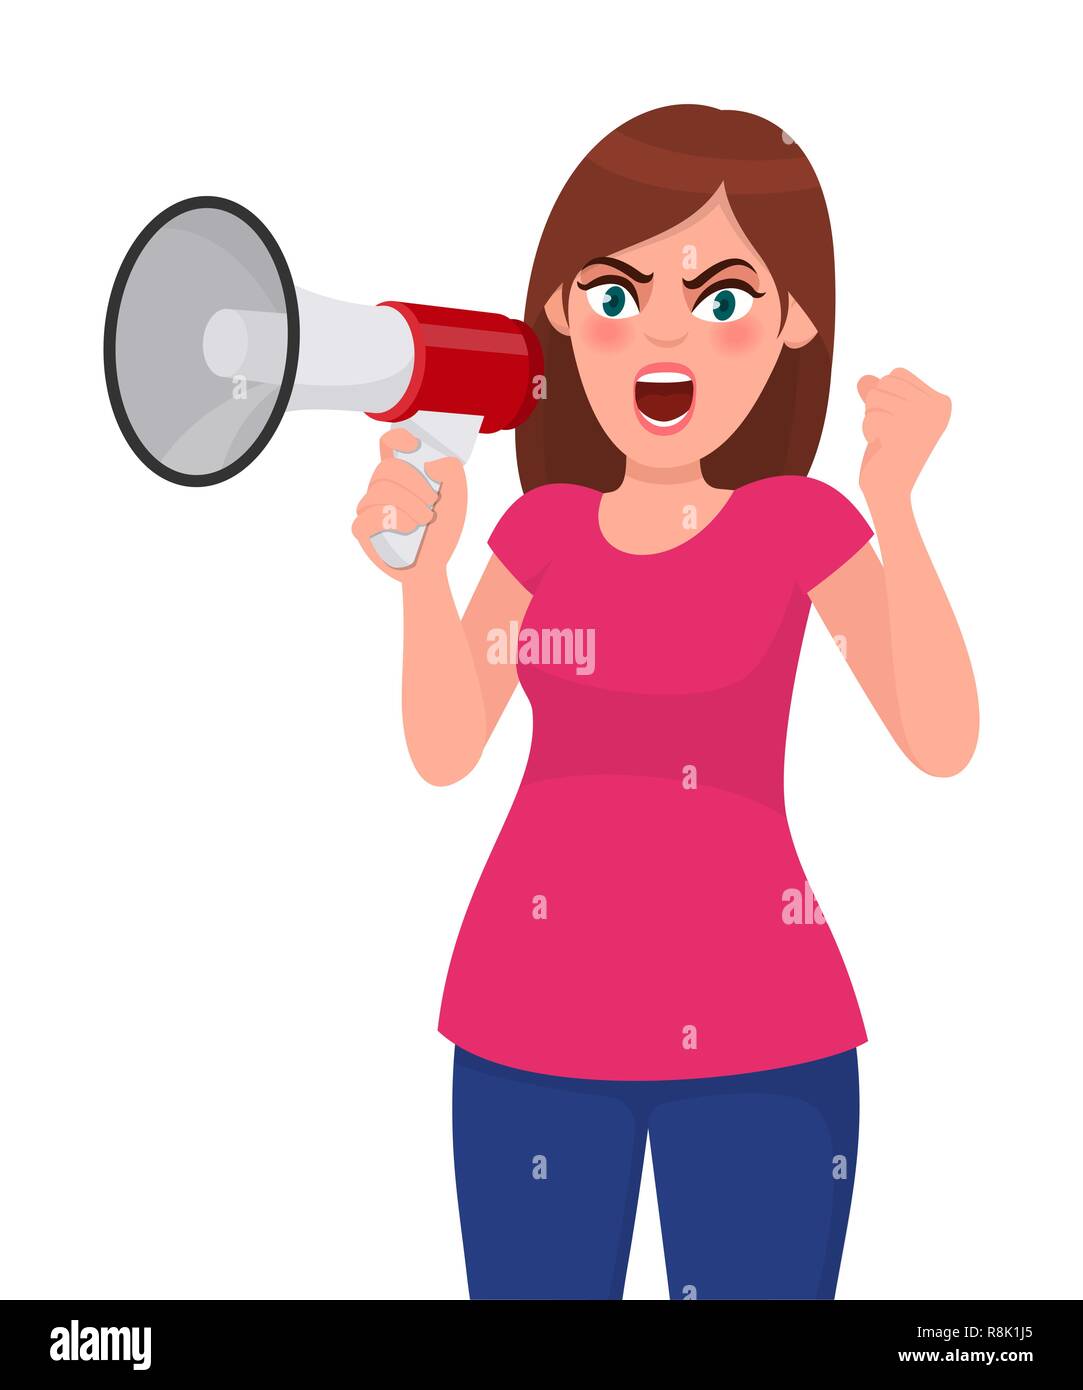 Angry woman holding a megaphone/loud speaker, raising fist and screaming or shouting loud while eyes opened widely. Megaphone and loudspeaker concept  Stock Vector